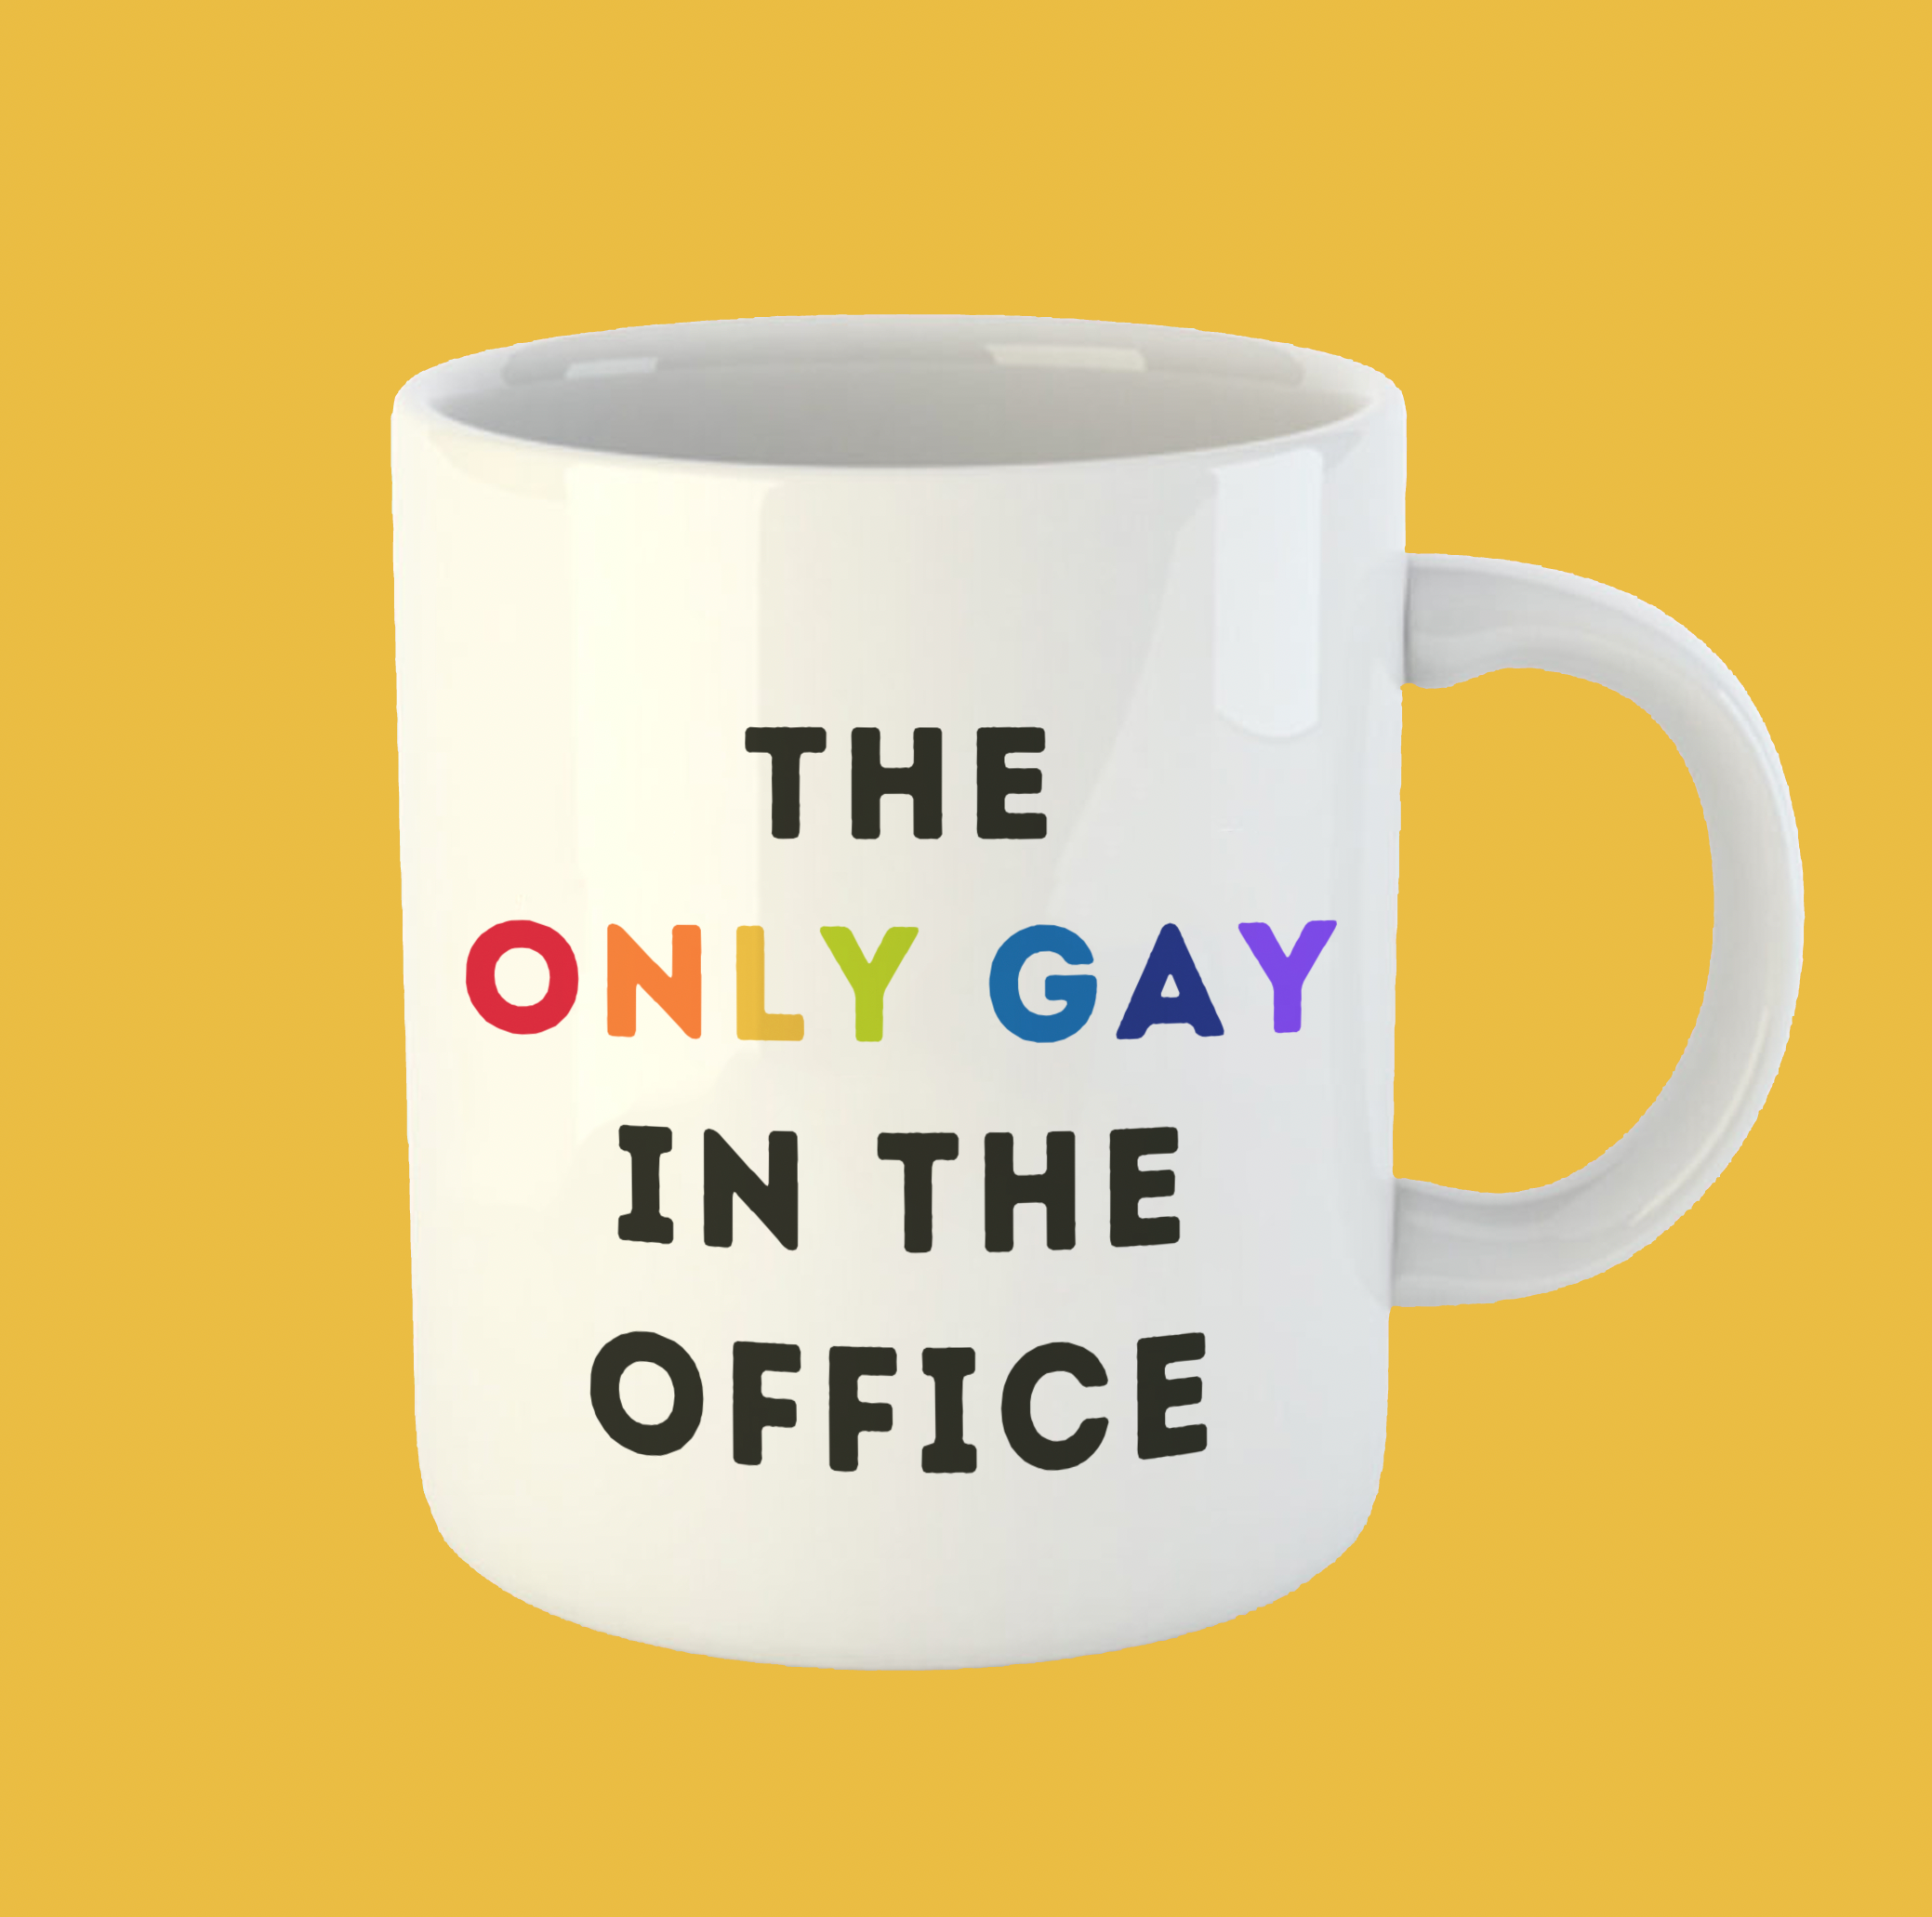 The Only Gay In The Office Mug